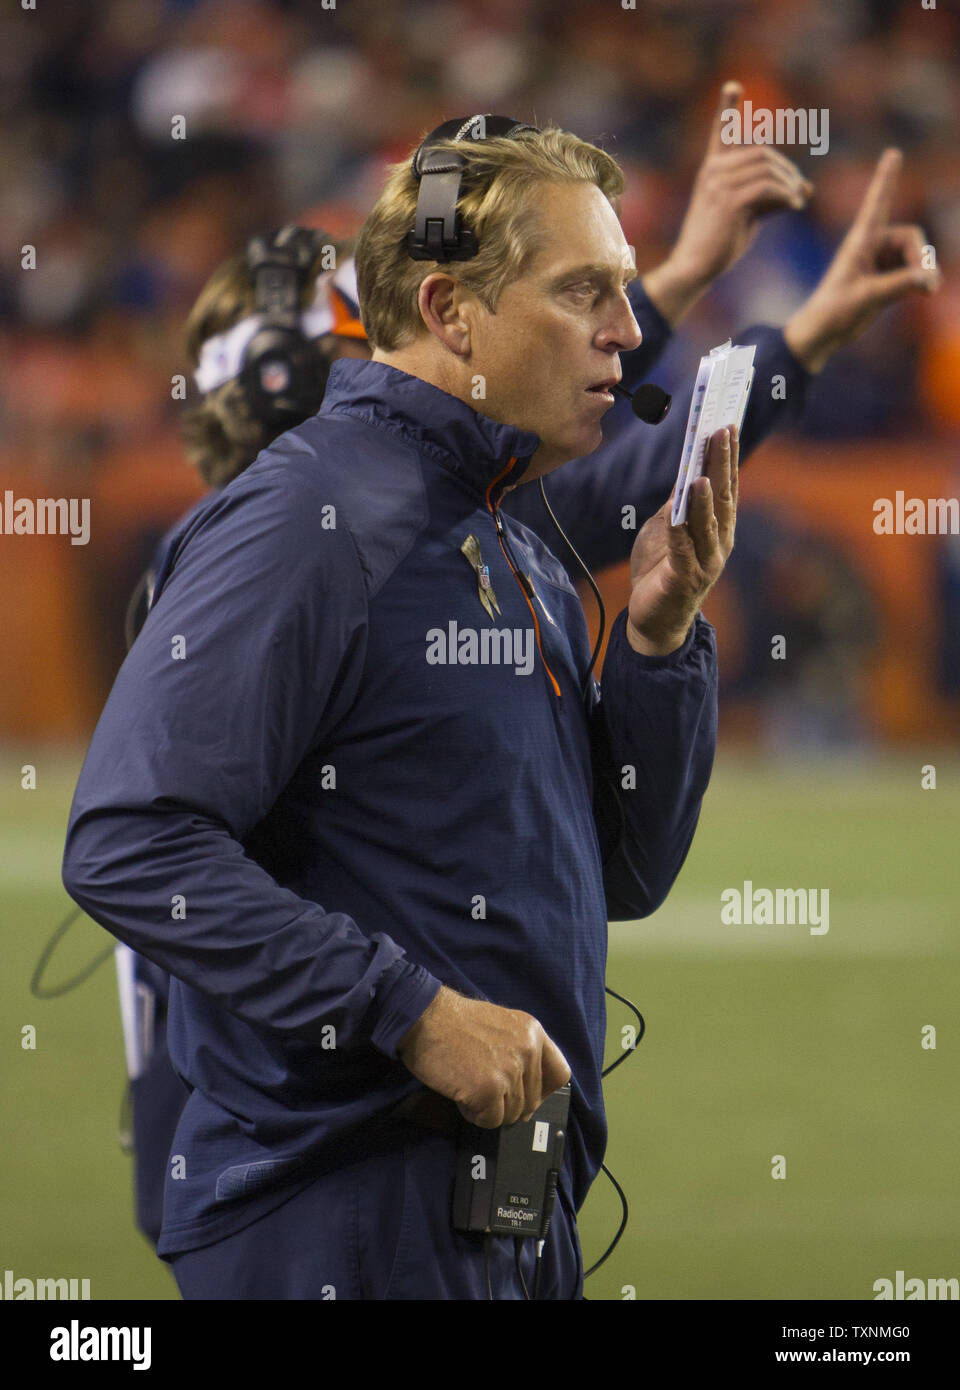 Denver Broncos interim head coach/defensive coordinator Jack Del Rio leads  the Broncos to a win over the Kansas City Chiefs at Sports Authority Field  at Mile High on November 17, 2013 in